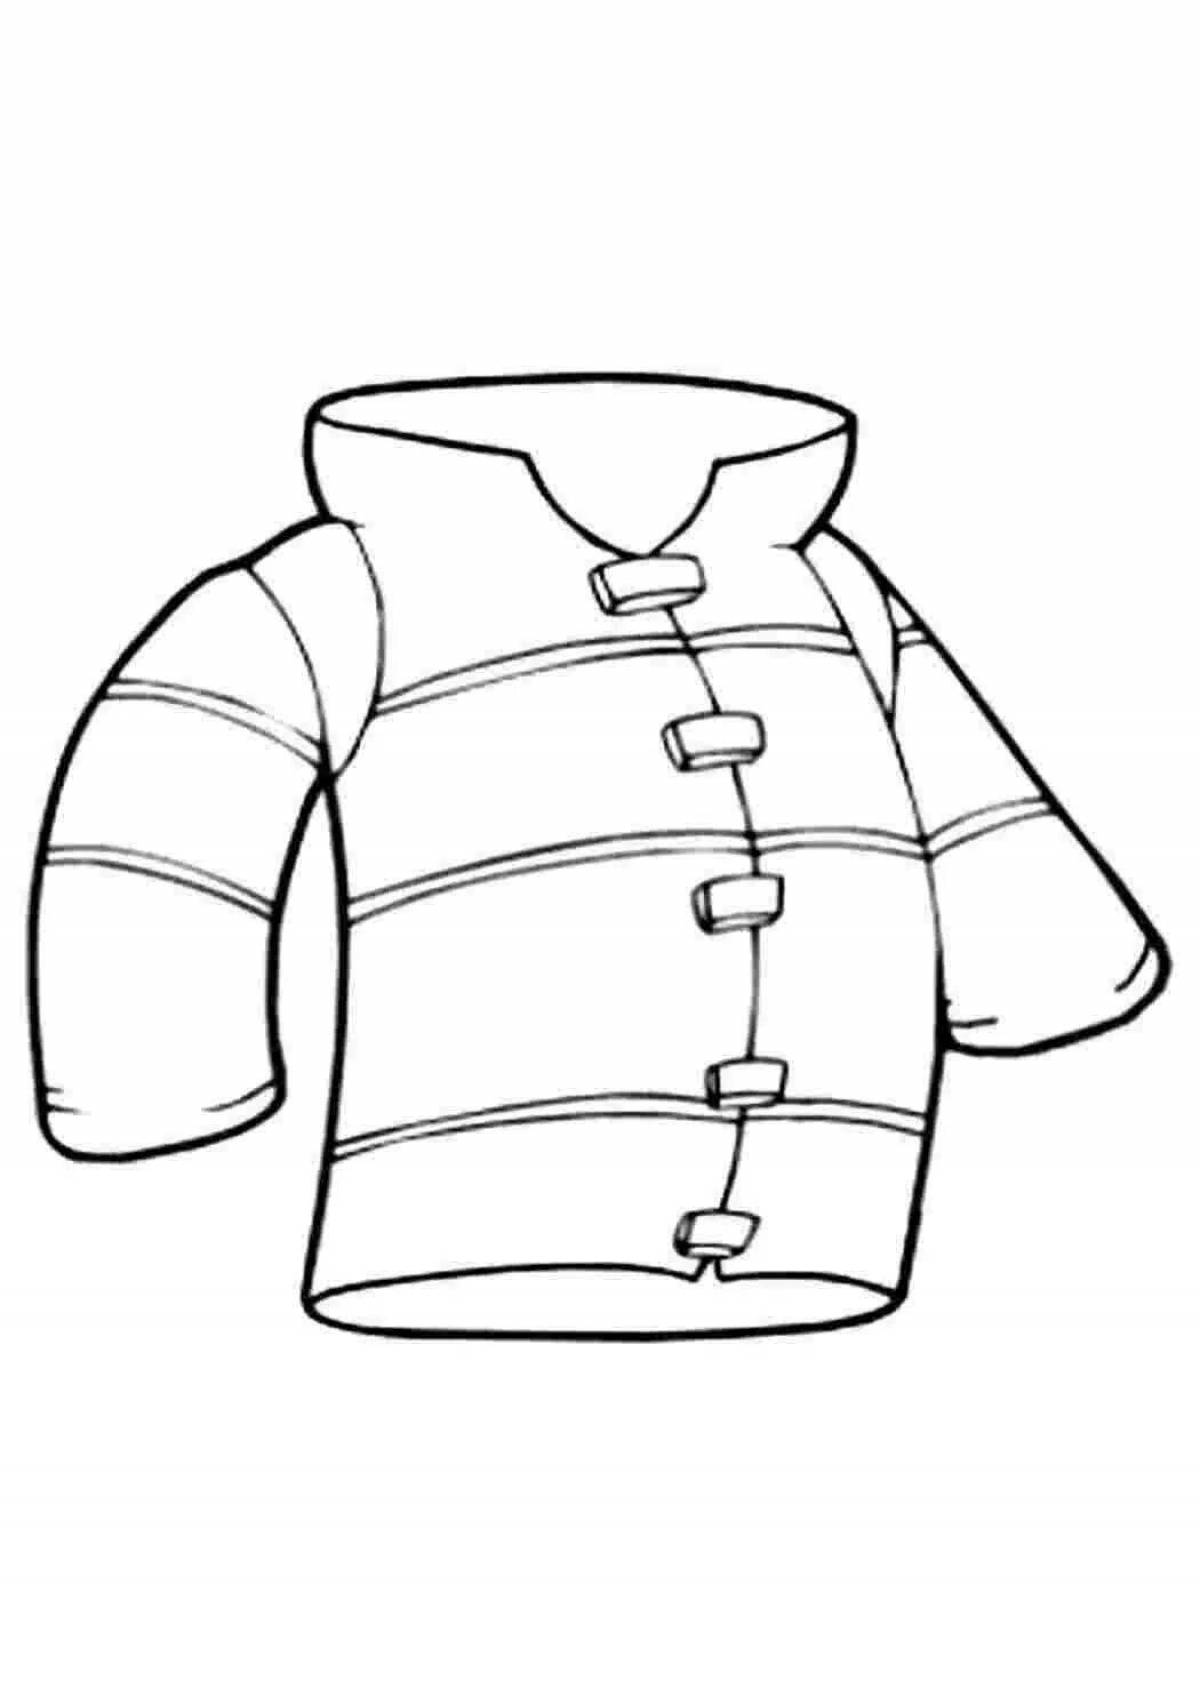 Fat jacket coloring book for kids